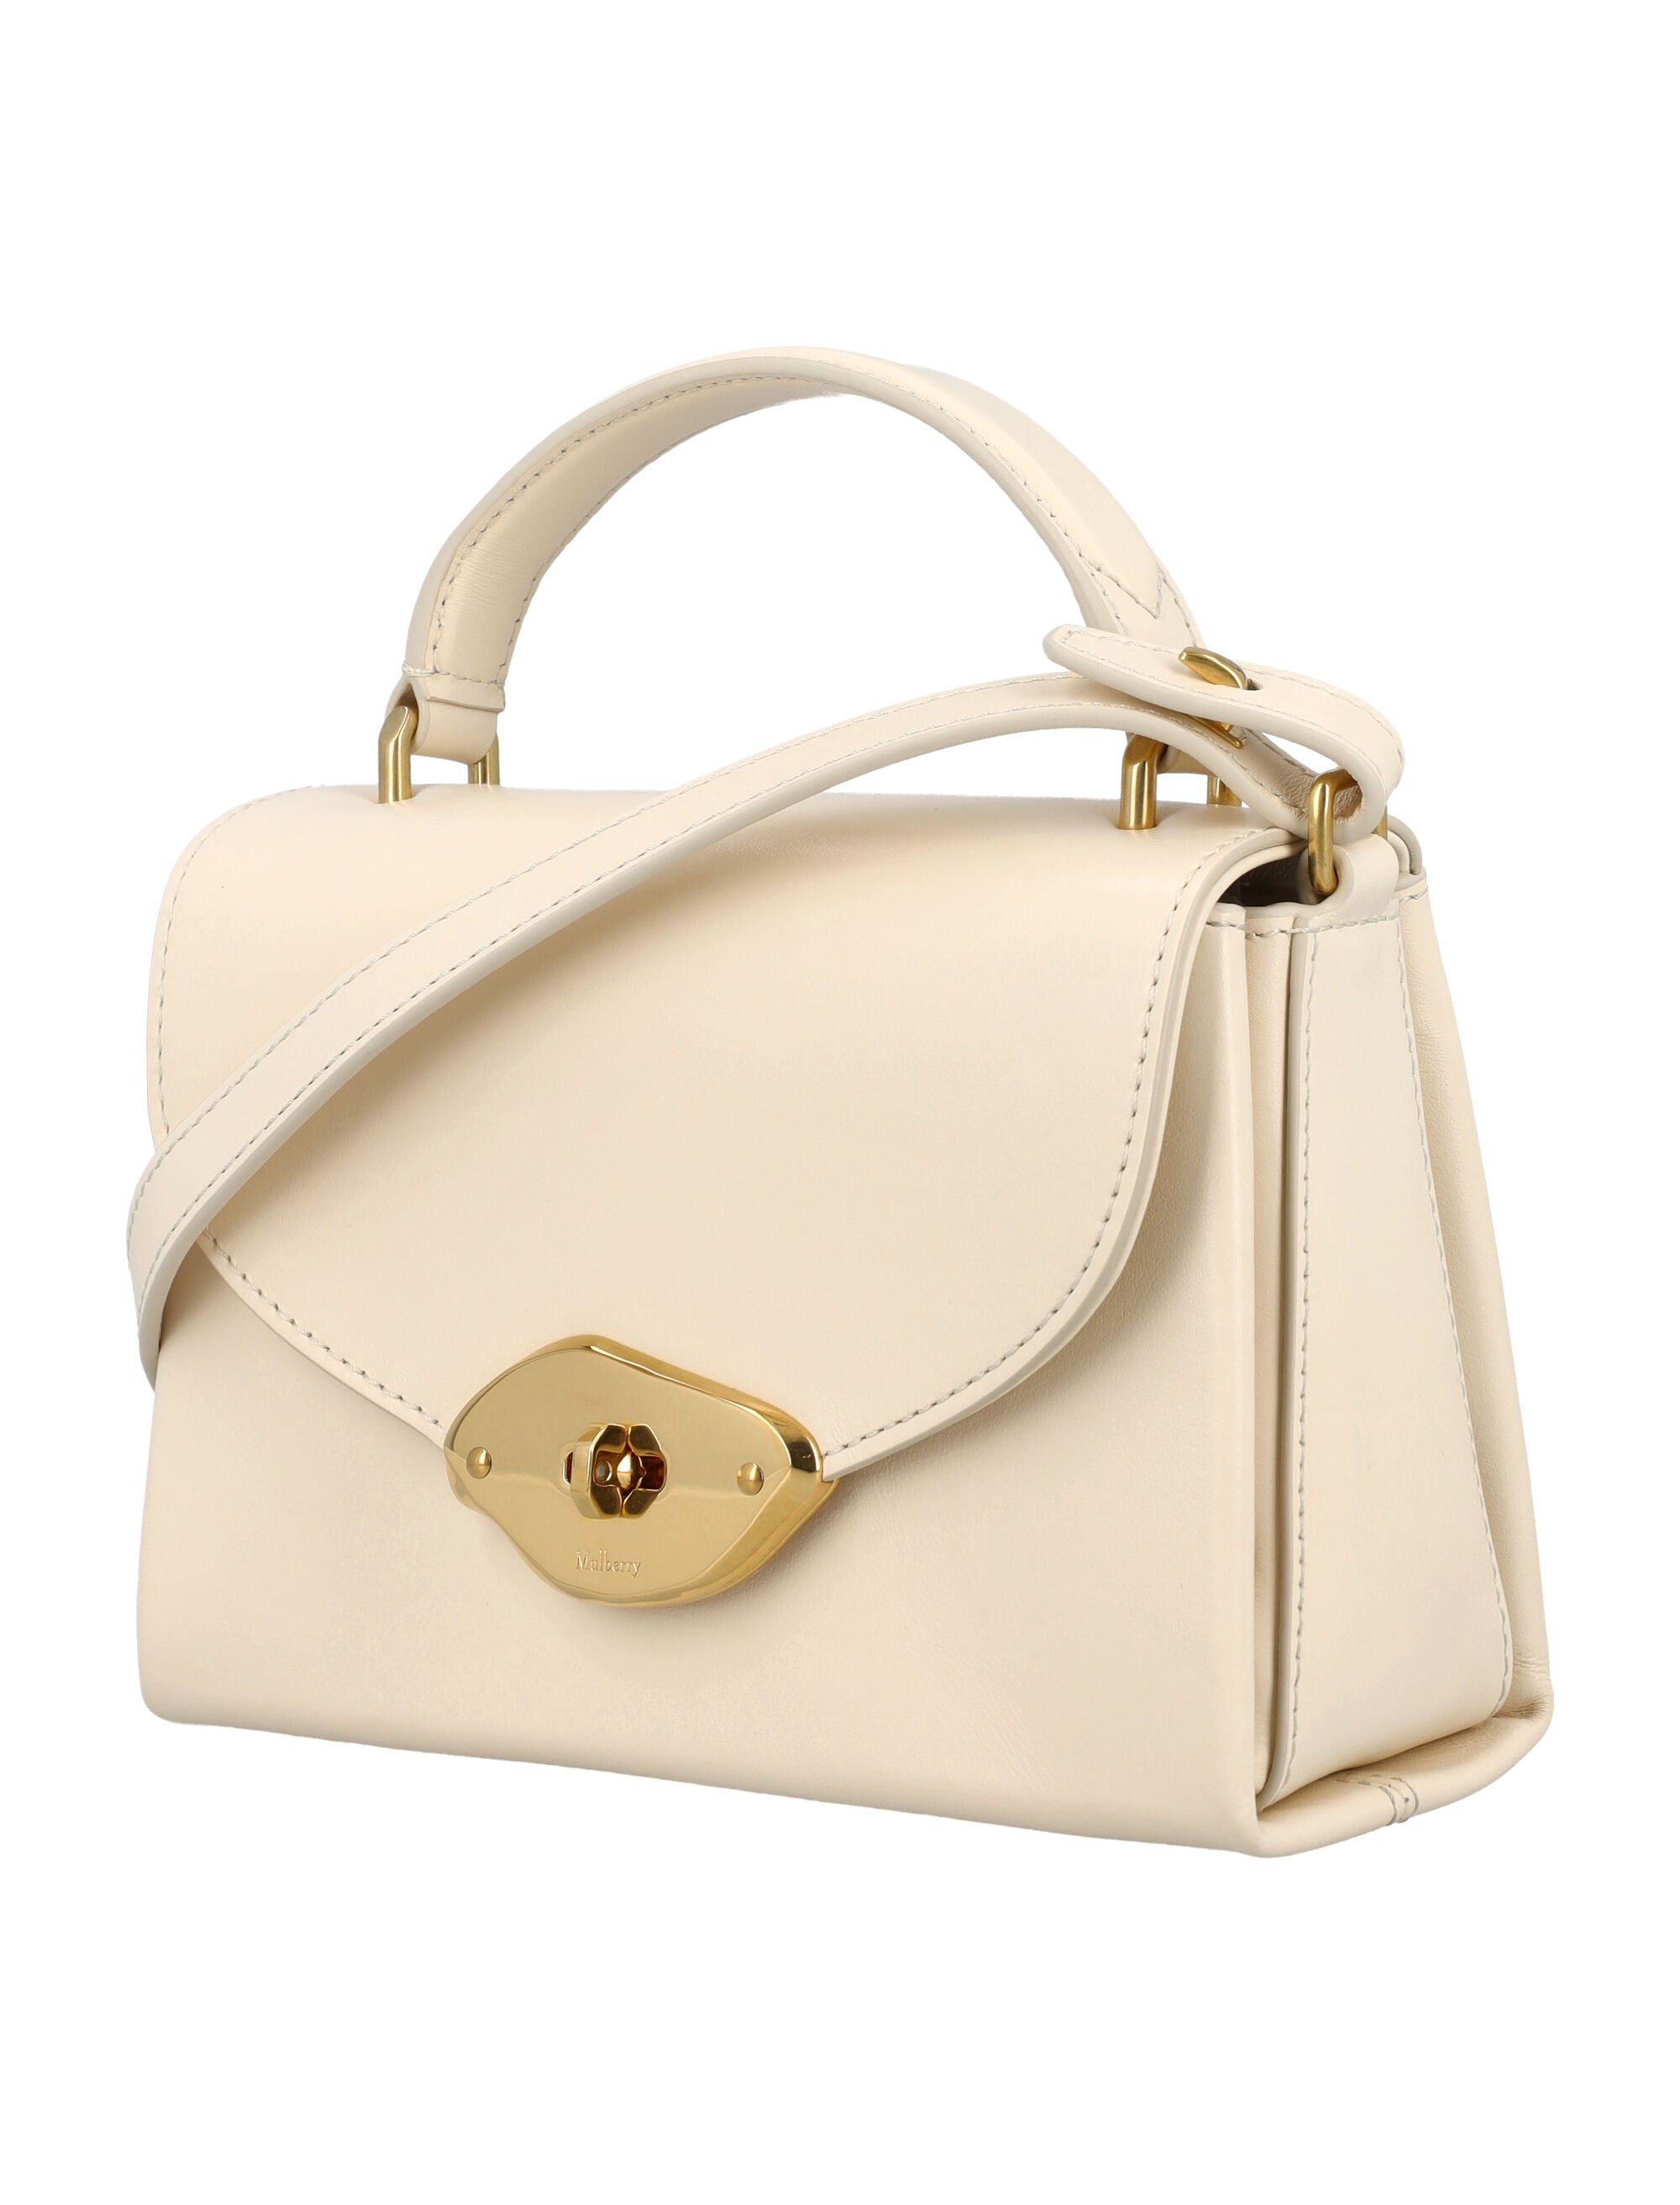 Shop Mulberry Modern Glossy Wool Top Handle Handbag For Women In White